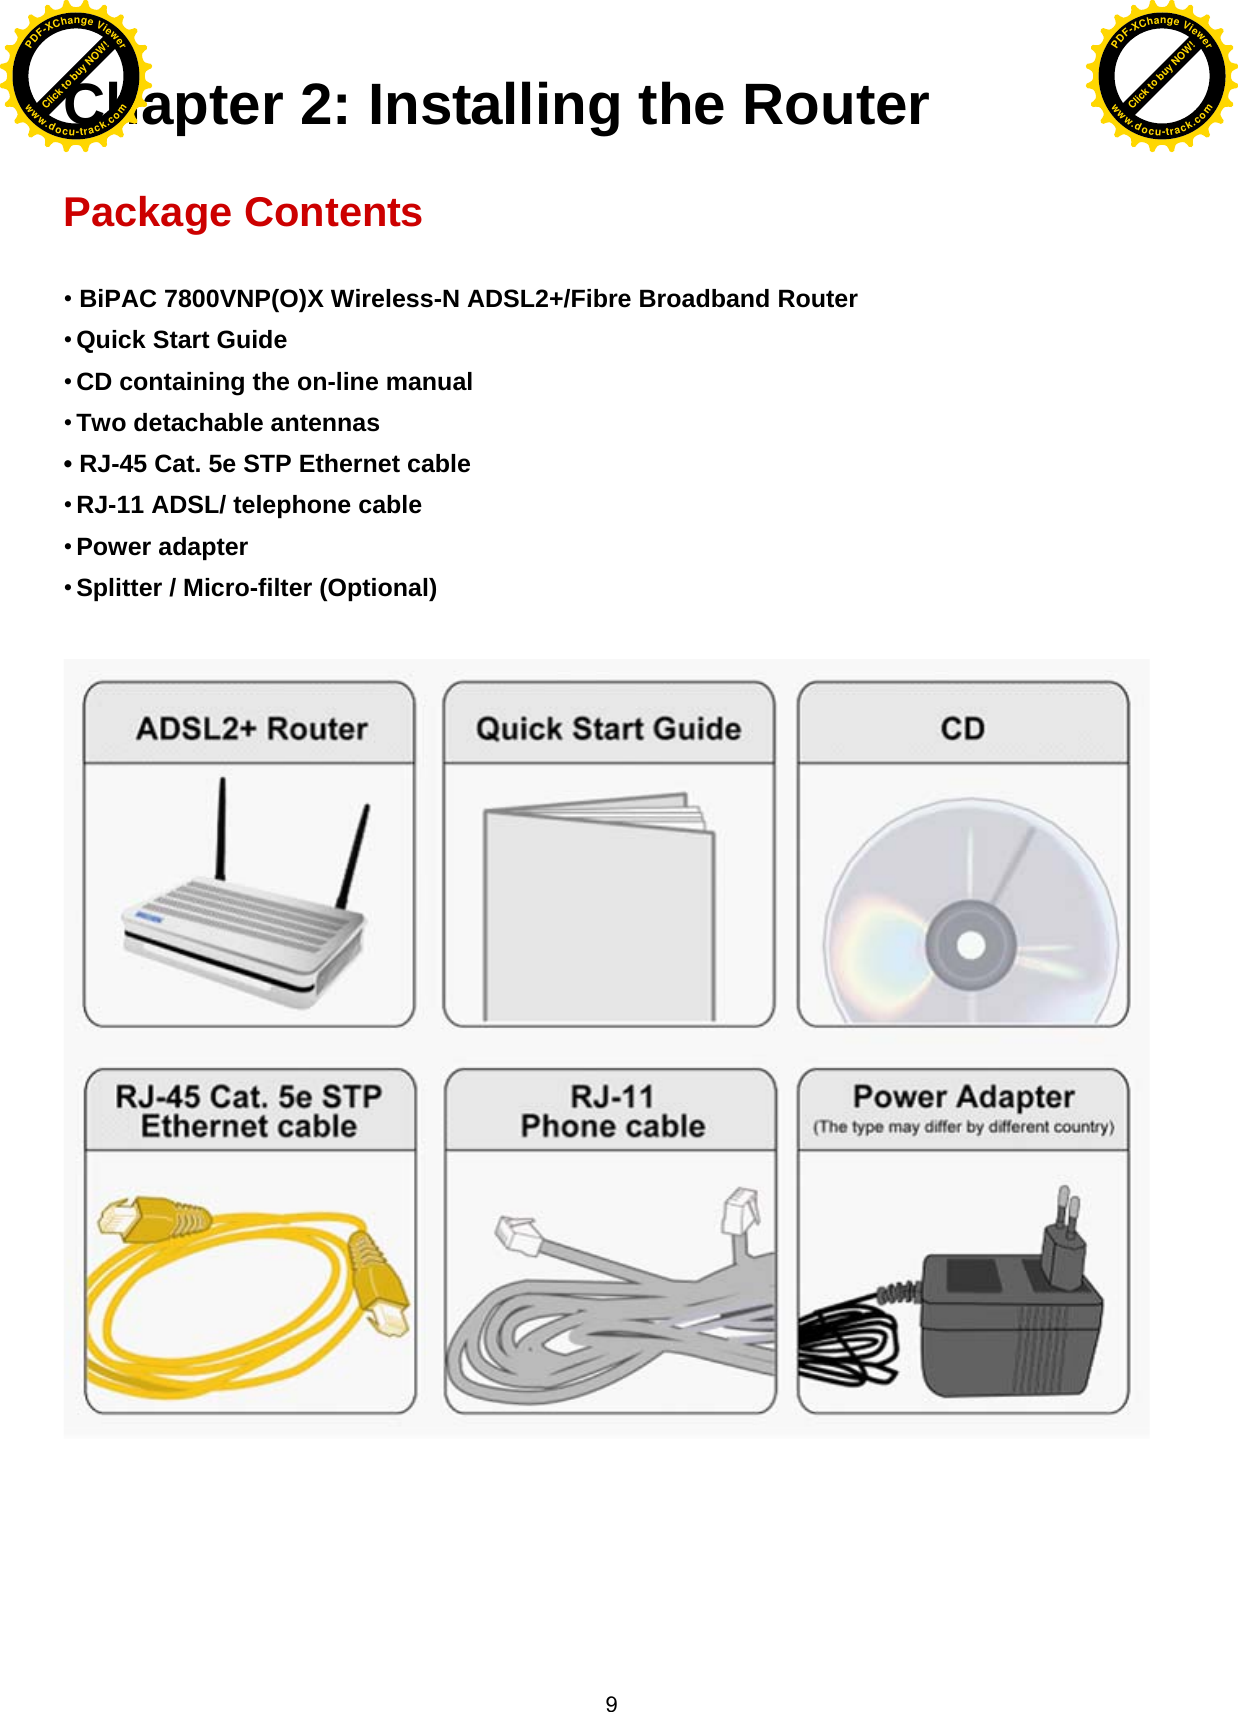  9 Chapter 2: Installing the Router  Package Contents  • BiPAC 7800VNP(O)X Wireless-N ADSL2+/Fibre Broadband Router • Quick Start Guide • CD containing the on-line manual • Two detachable antennas  • RJ-45 Cat. 5e STP Ethernet cable • RJ-11 ADSL/ telephone cable • Power adapter • Splitter / Micro-filter (Optional)             Click to buy NOW!PDF-XChange Viewerwww.docu-track.comClick to buy NOW!PDF-XChange Viewerwww.docu-track.com